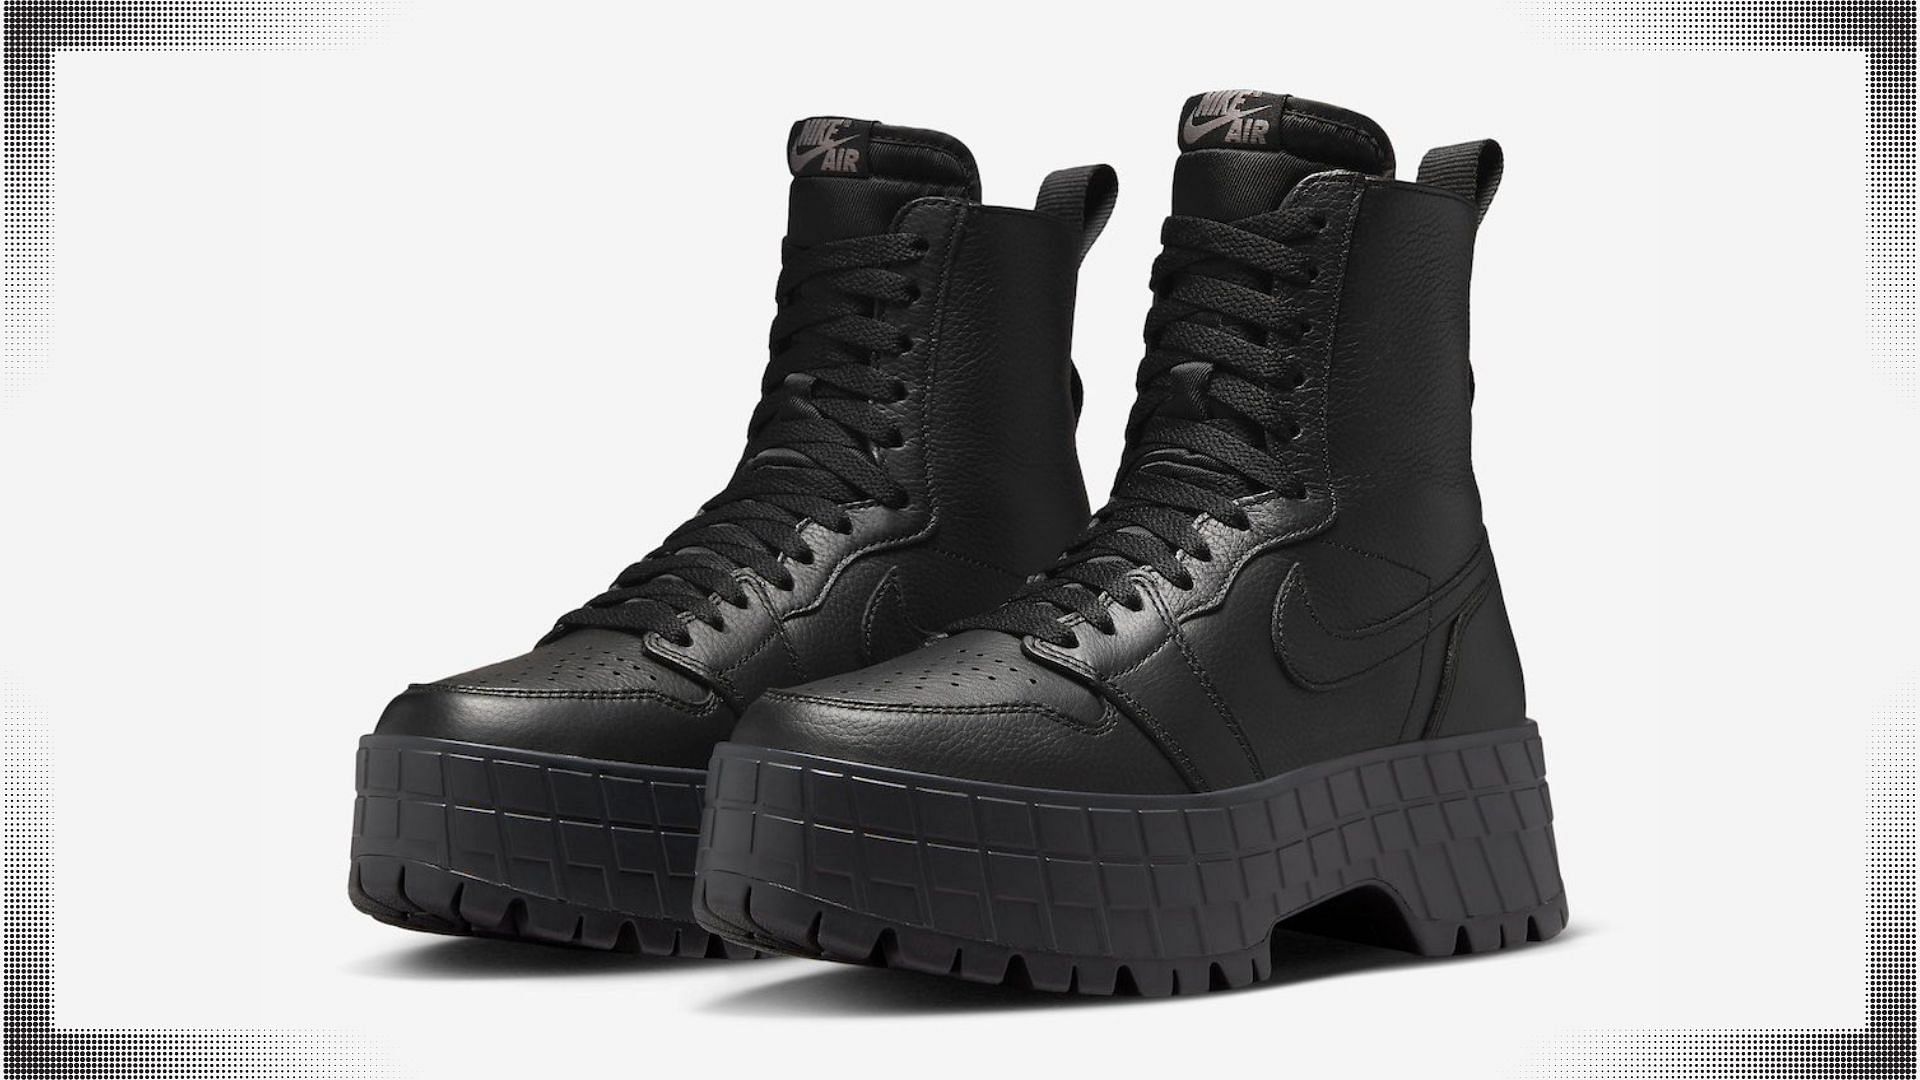 nike: Air Jordan 1 Boot “Brooklyn” colorway: Where to get, price, and ...